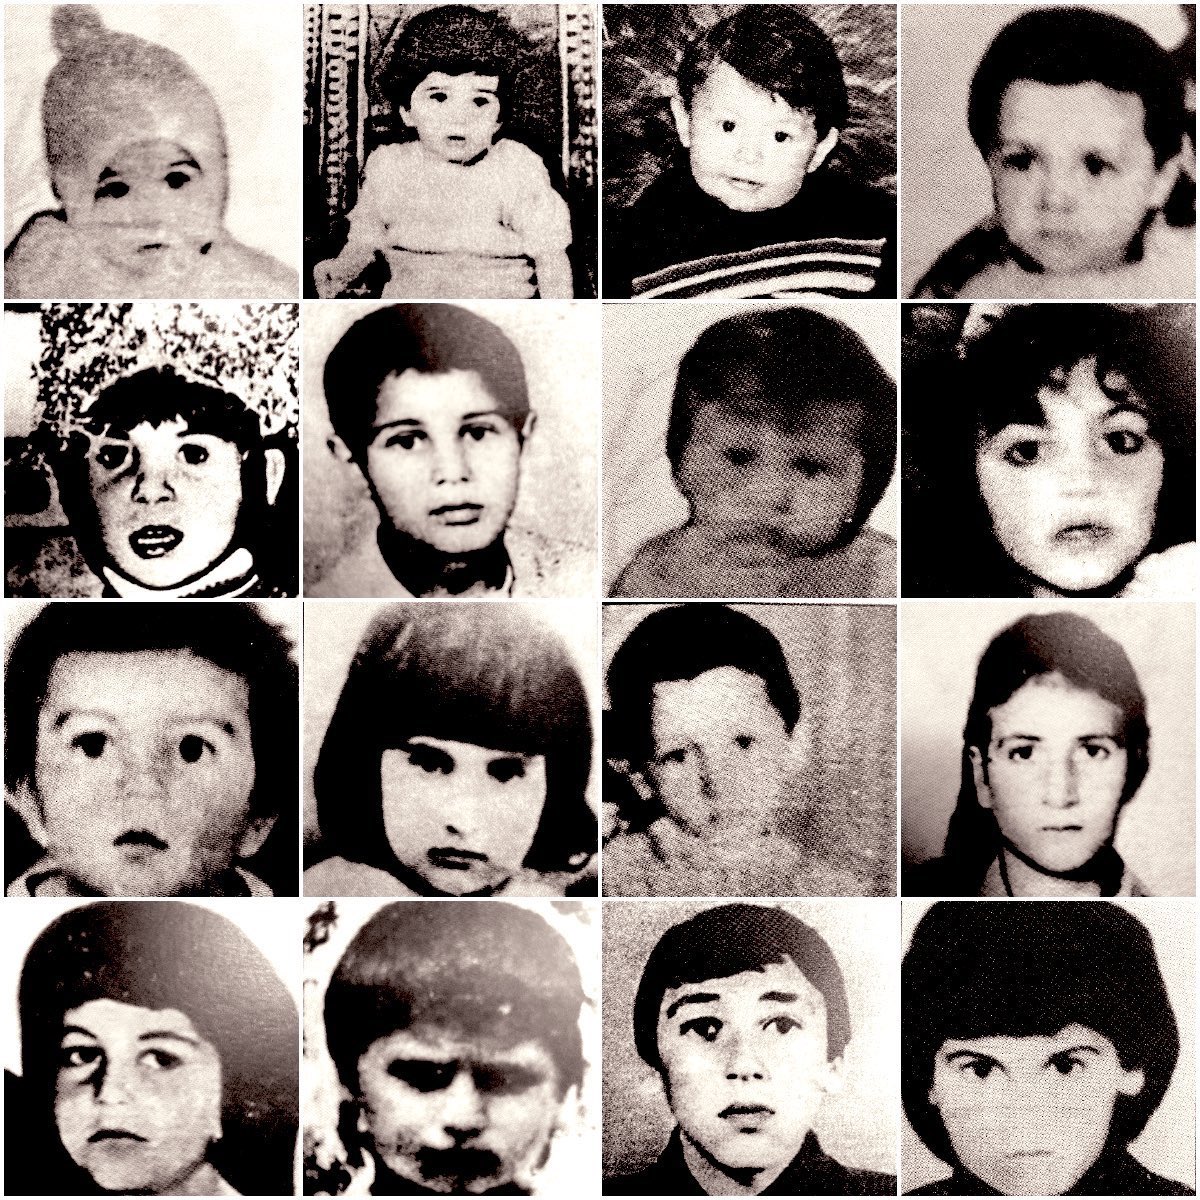 Armenian “brave” separatists spared none of these innocent children while committing one of the worst atrocities of the 20th century in #Khojaly on February 26, 1992. In total, they killed 613 civilians overnight, all unarmed, including 106 women and 63 children.